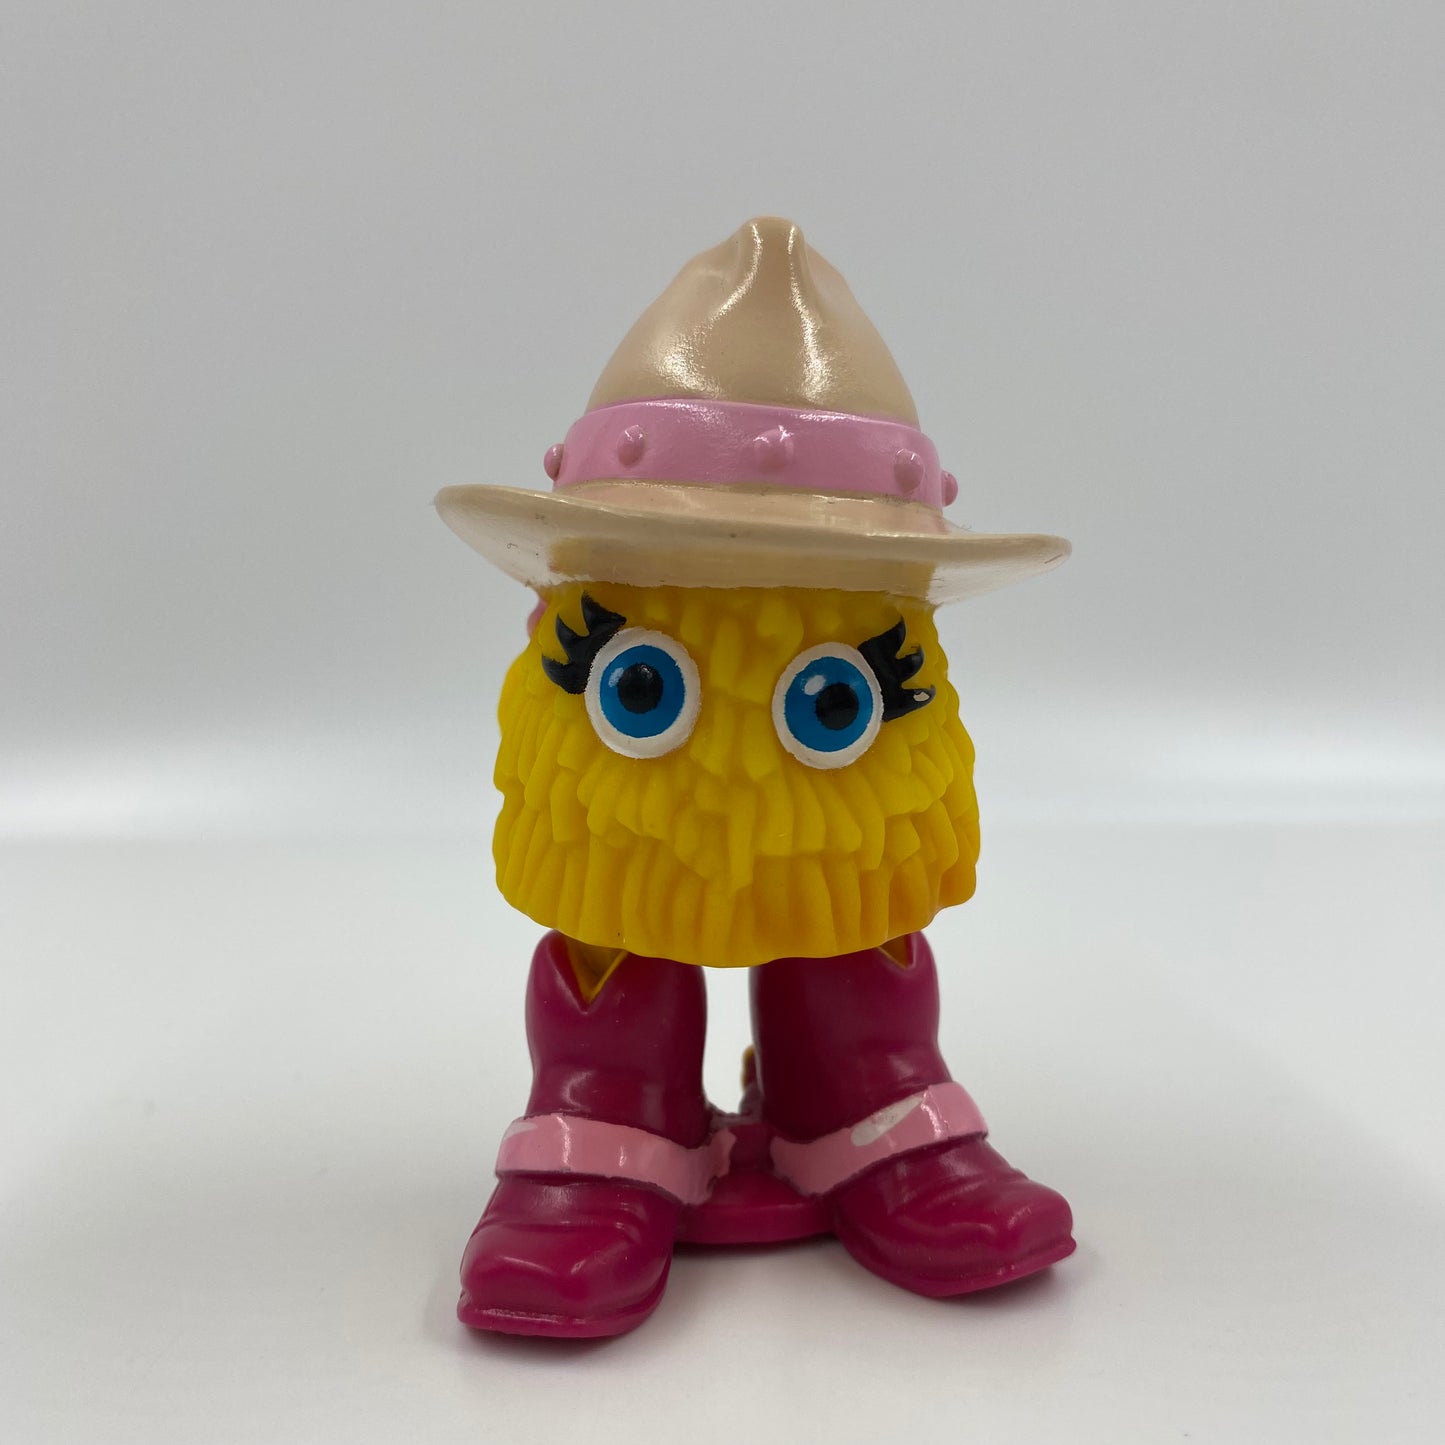 McDonald's Funny Fry Friends Little Darlin McDonald’s Happy Meal toy (1989) loose